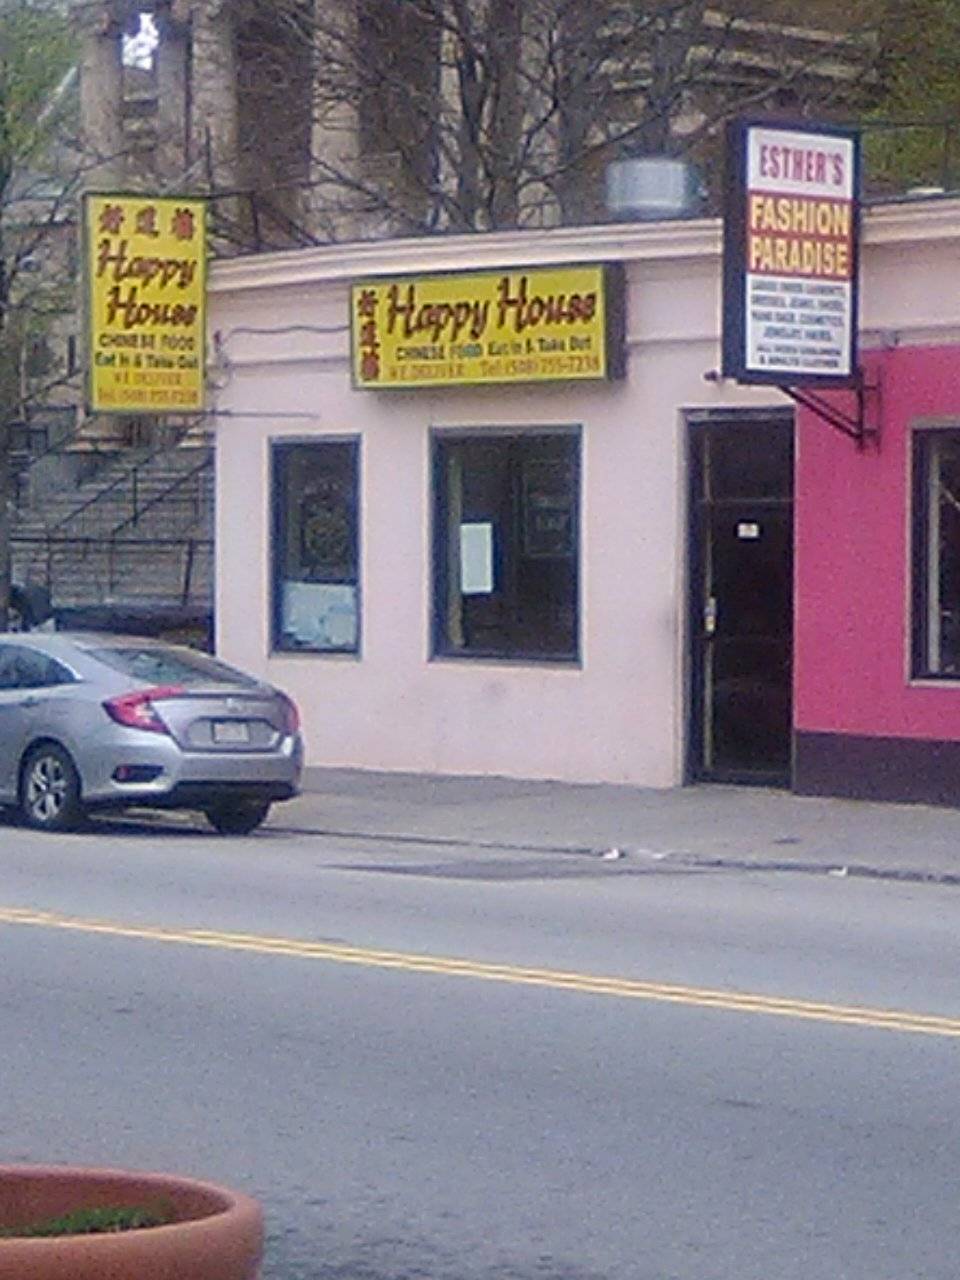 Happy House | restaurant | 872 Main St, Worcester, MA 01610, USA | 5087557238 OR +1 508-755-7238